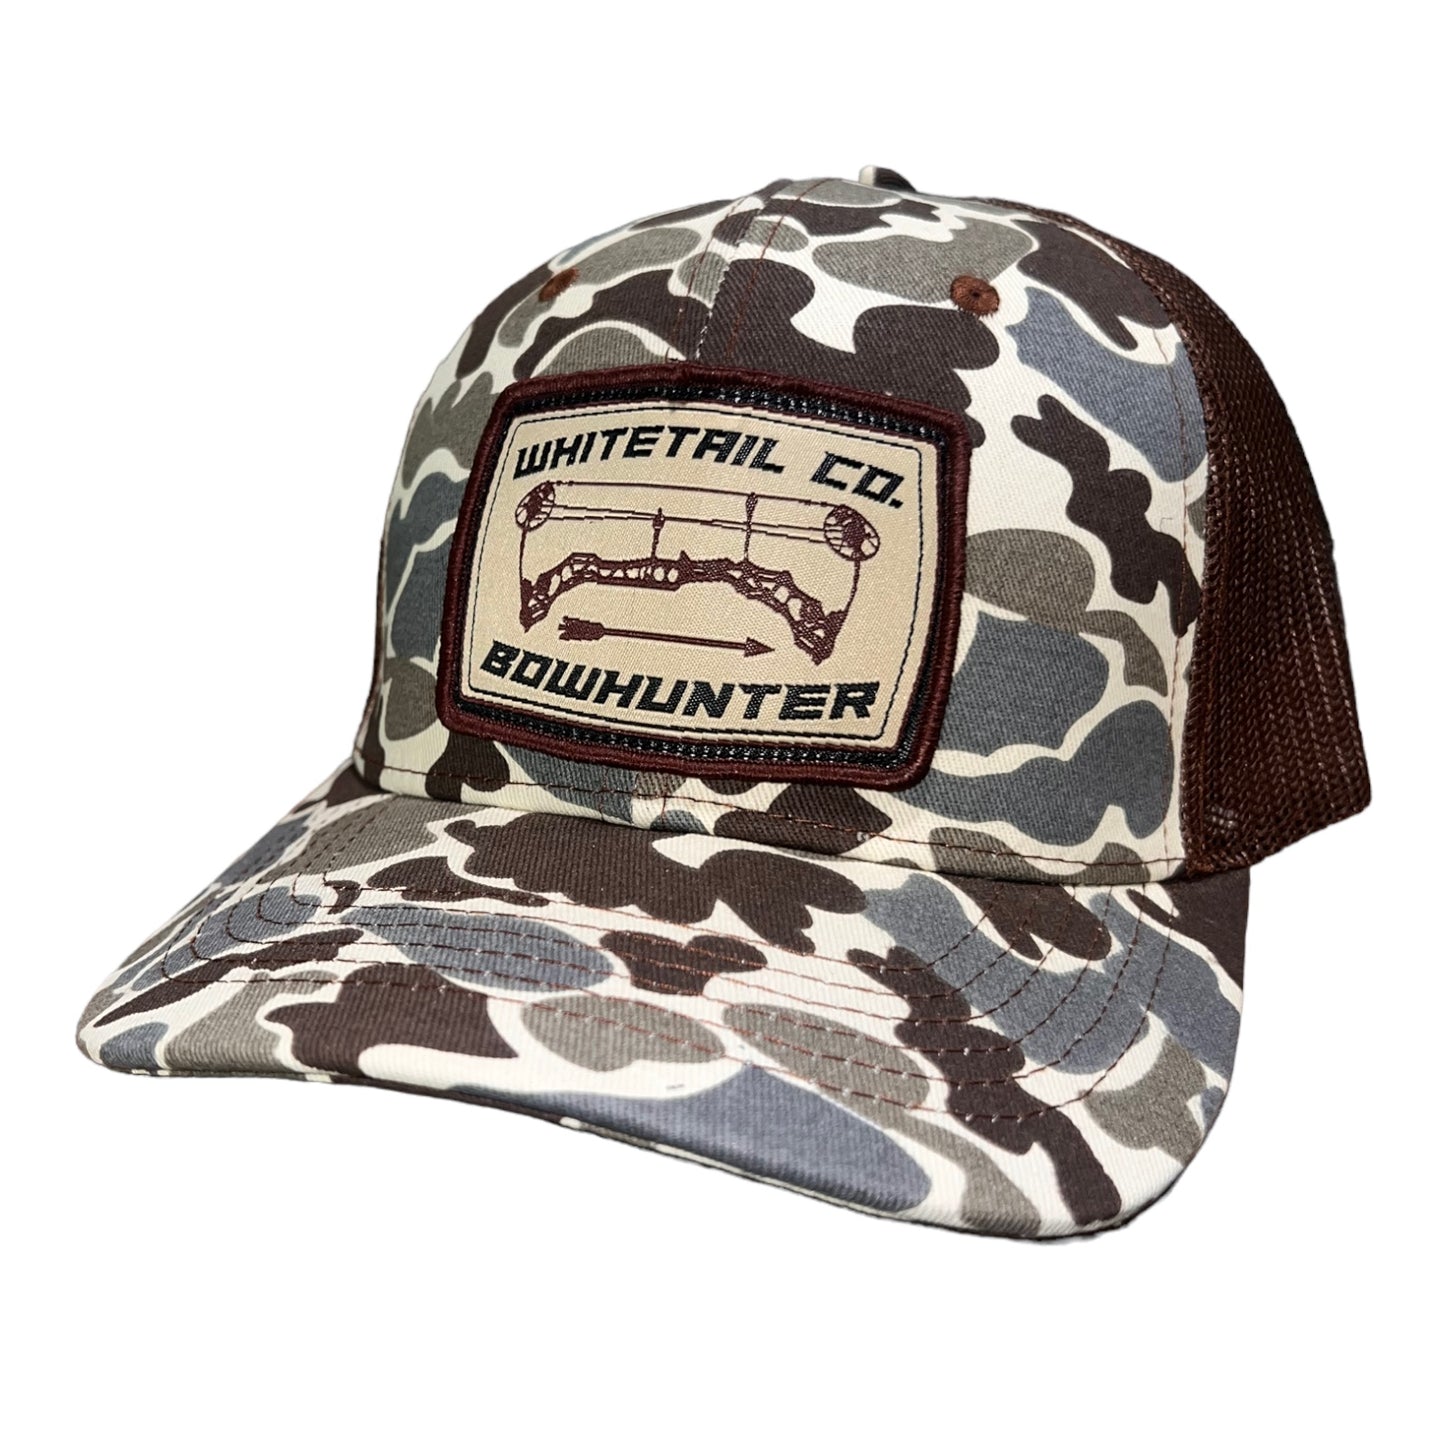 Whitetail Co. Bowhunter Old School Camo